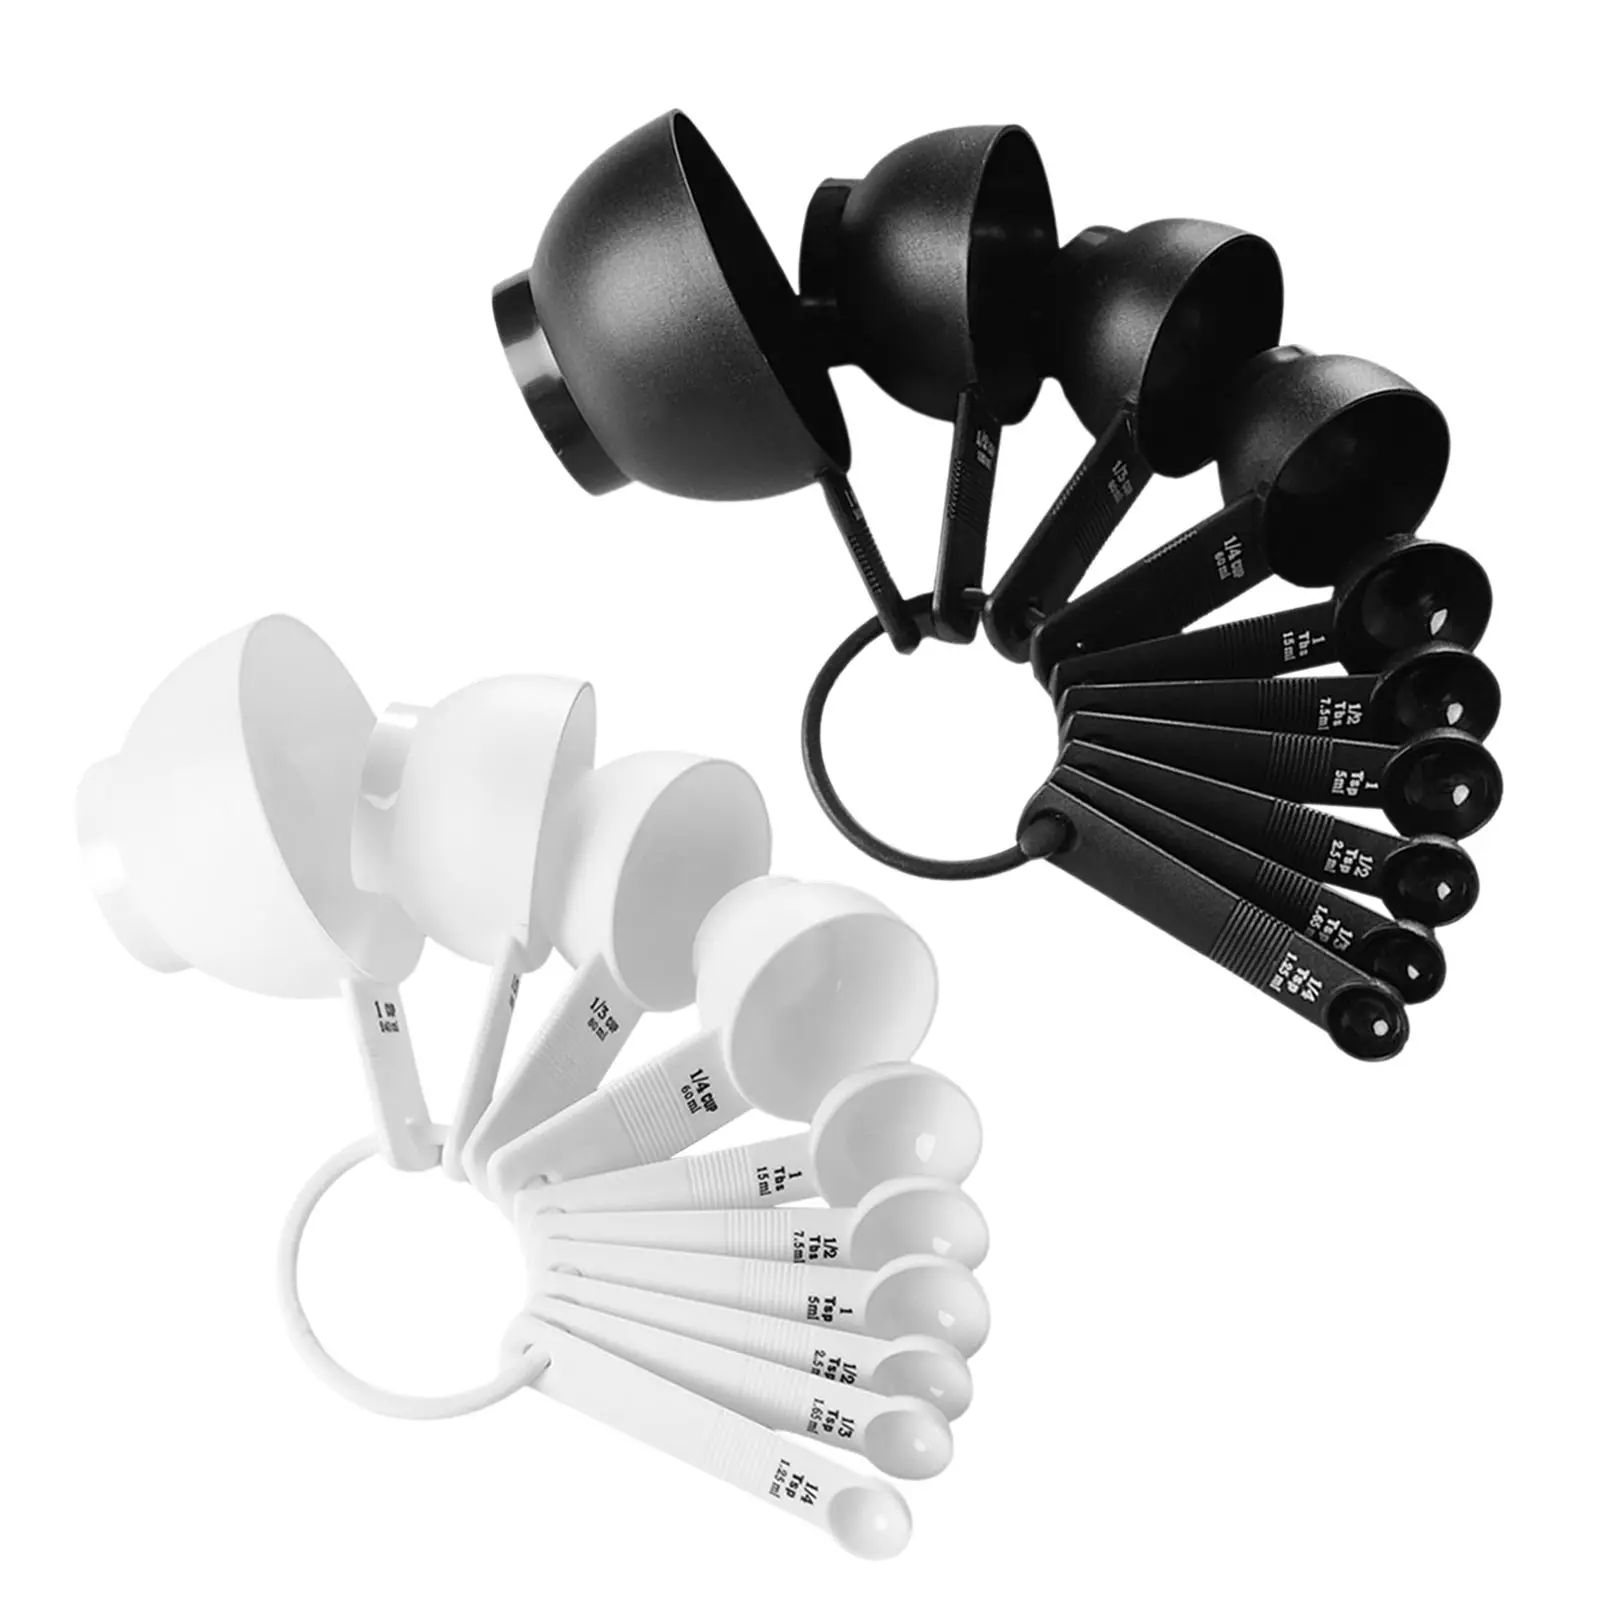 

Measuring Cups Set Of 10 Simply Modern Professional 10-pc PP Measuring Cups And Spoons Set With Handles Measuring Spoons Set